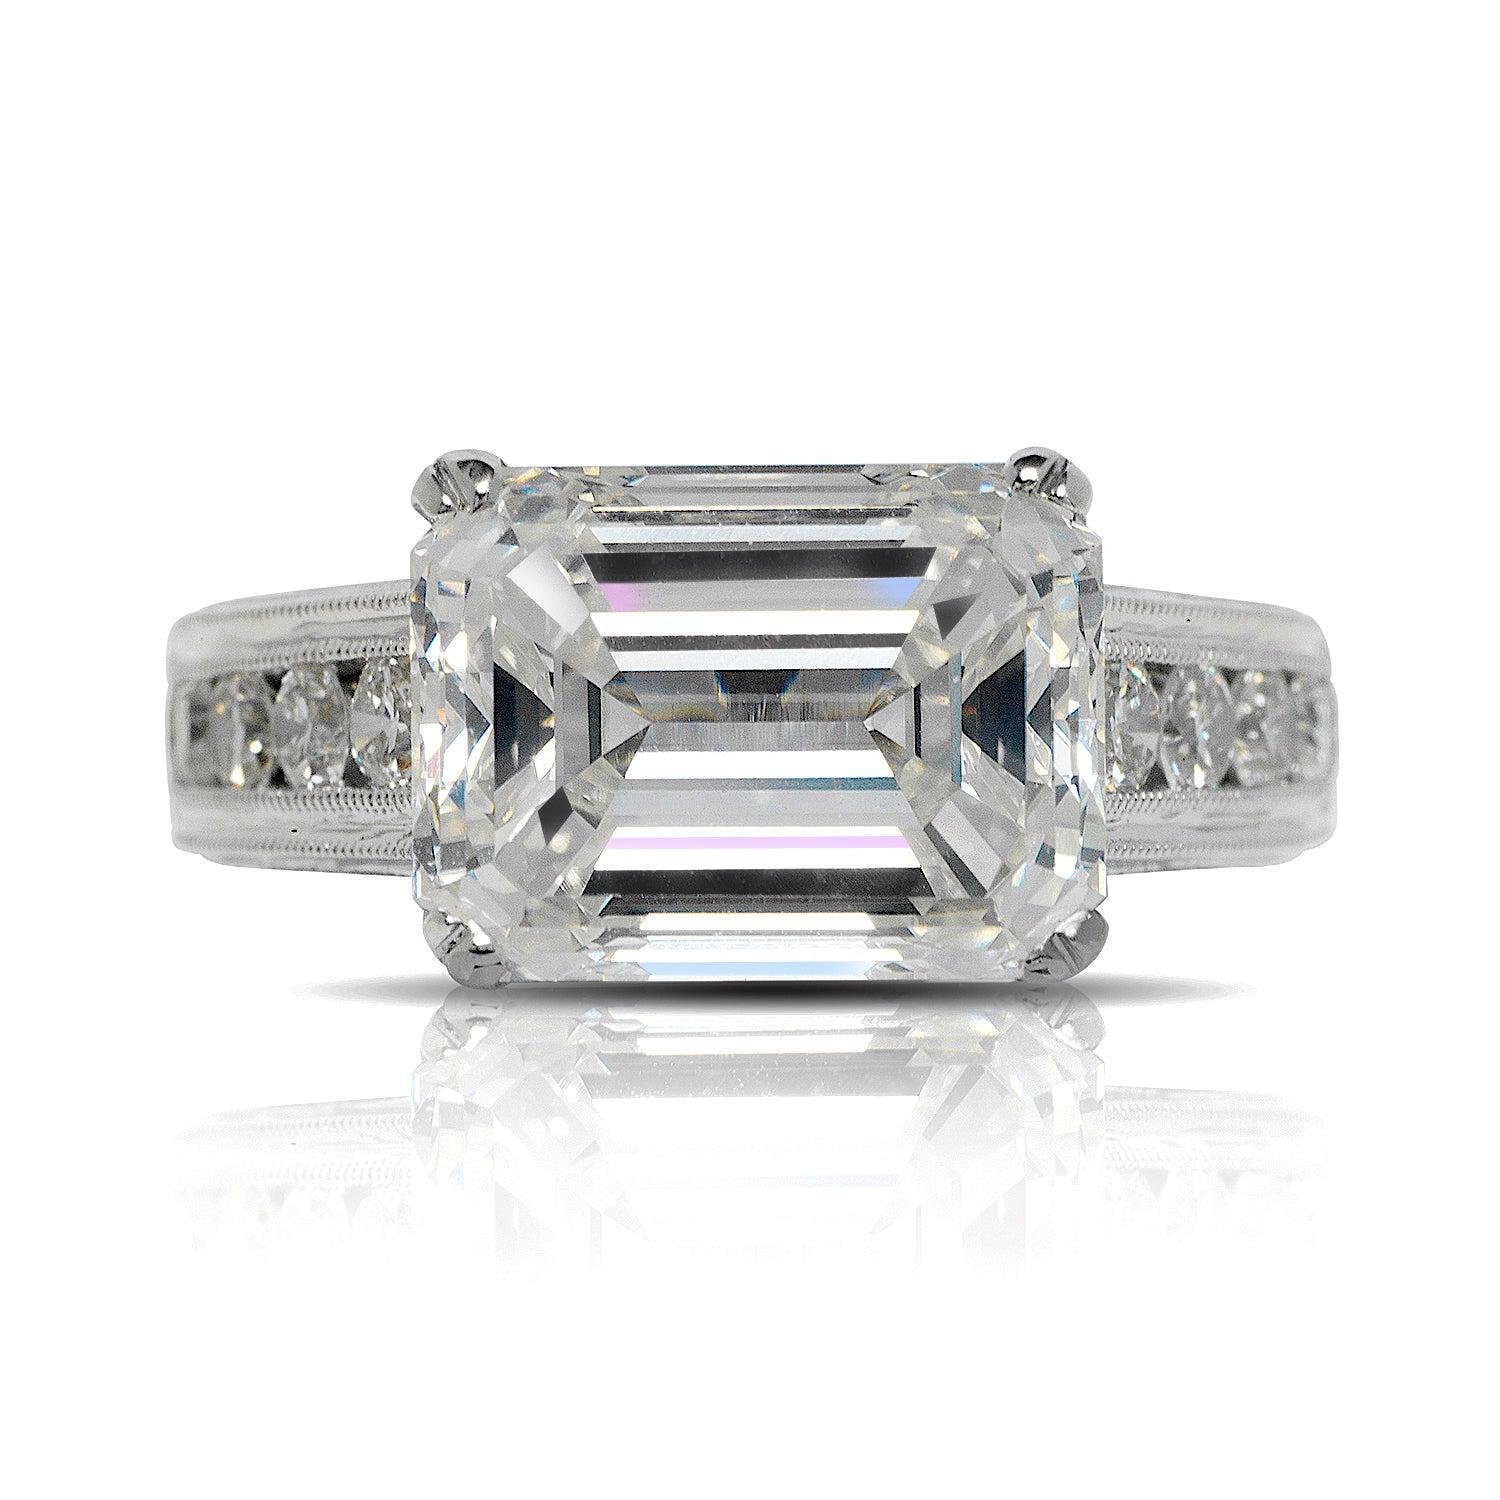 YOKO EMERALD CUT DIAMOND ENGAGEMENT RING 18K WHITE GOLD BY MIKE NEKTA
GIA CERTIFIED
Center Diamond
Carat Weight: 5.7 Carats
Color:  H*
Clarity: VVS1
Style:  EMERALD CUT 
Measurements:  11.5 x 8.6 x 5.9 mm
* This diamond has been treated by one or